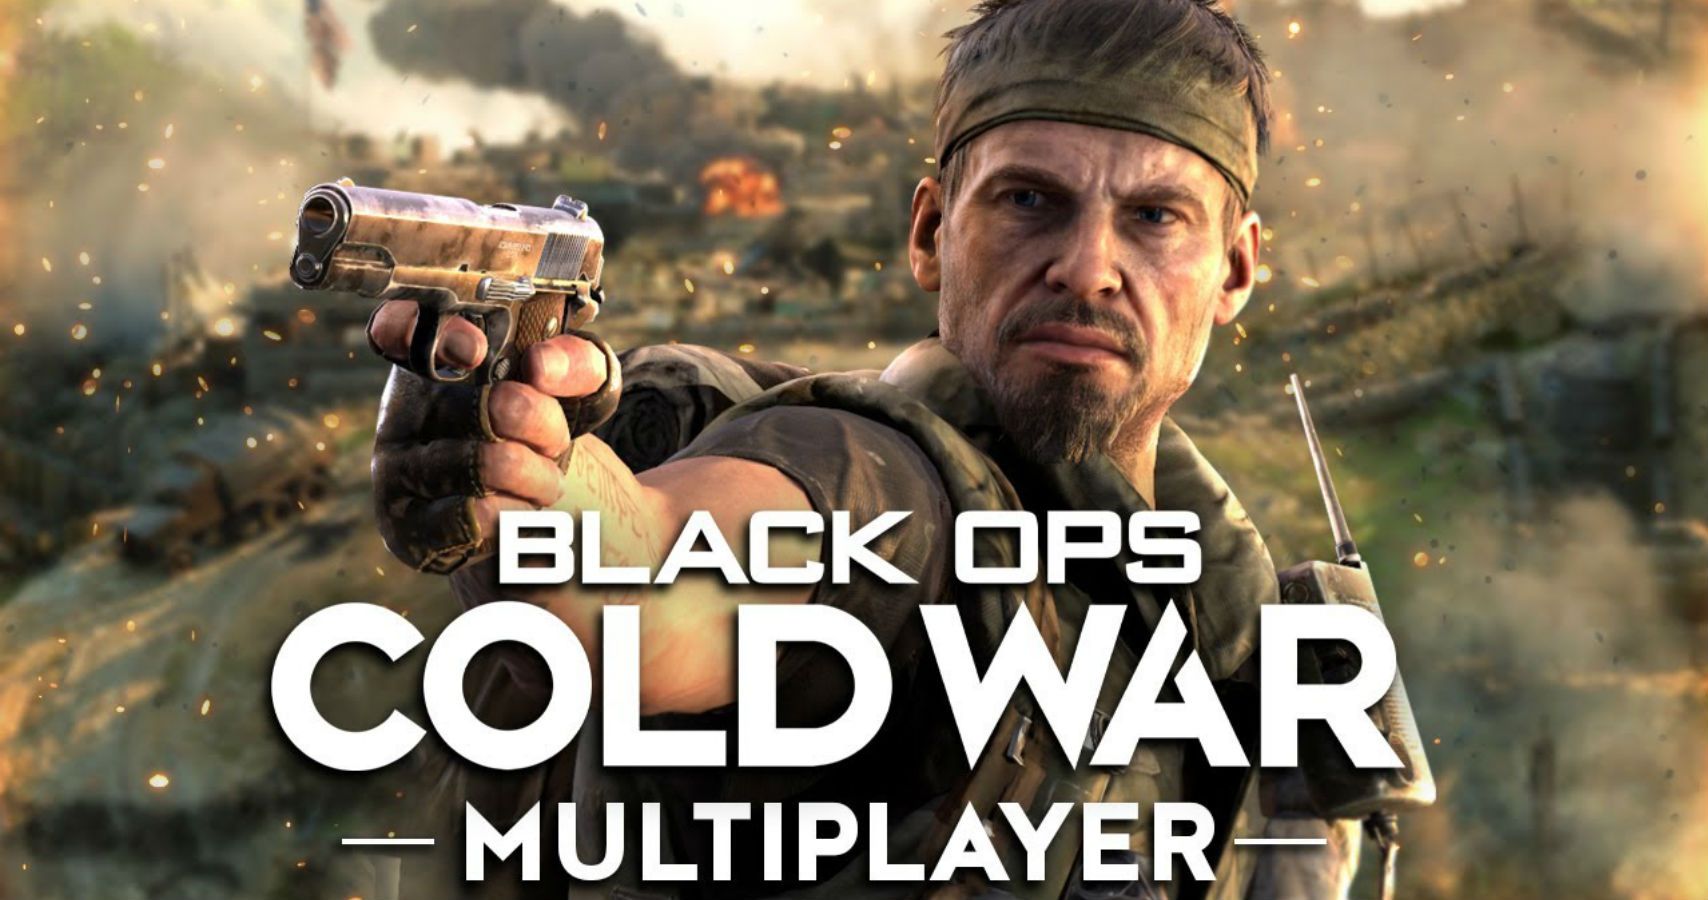 call of duty black ops cold war is now live